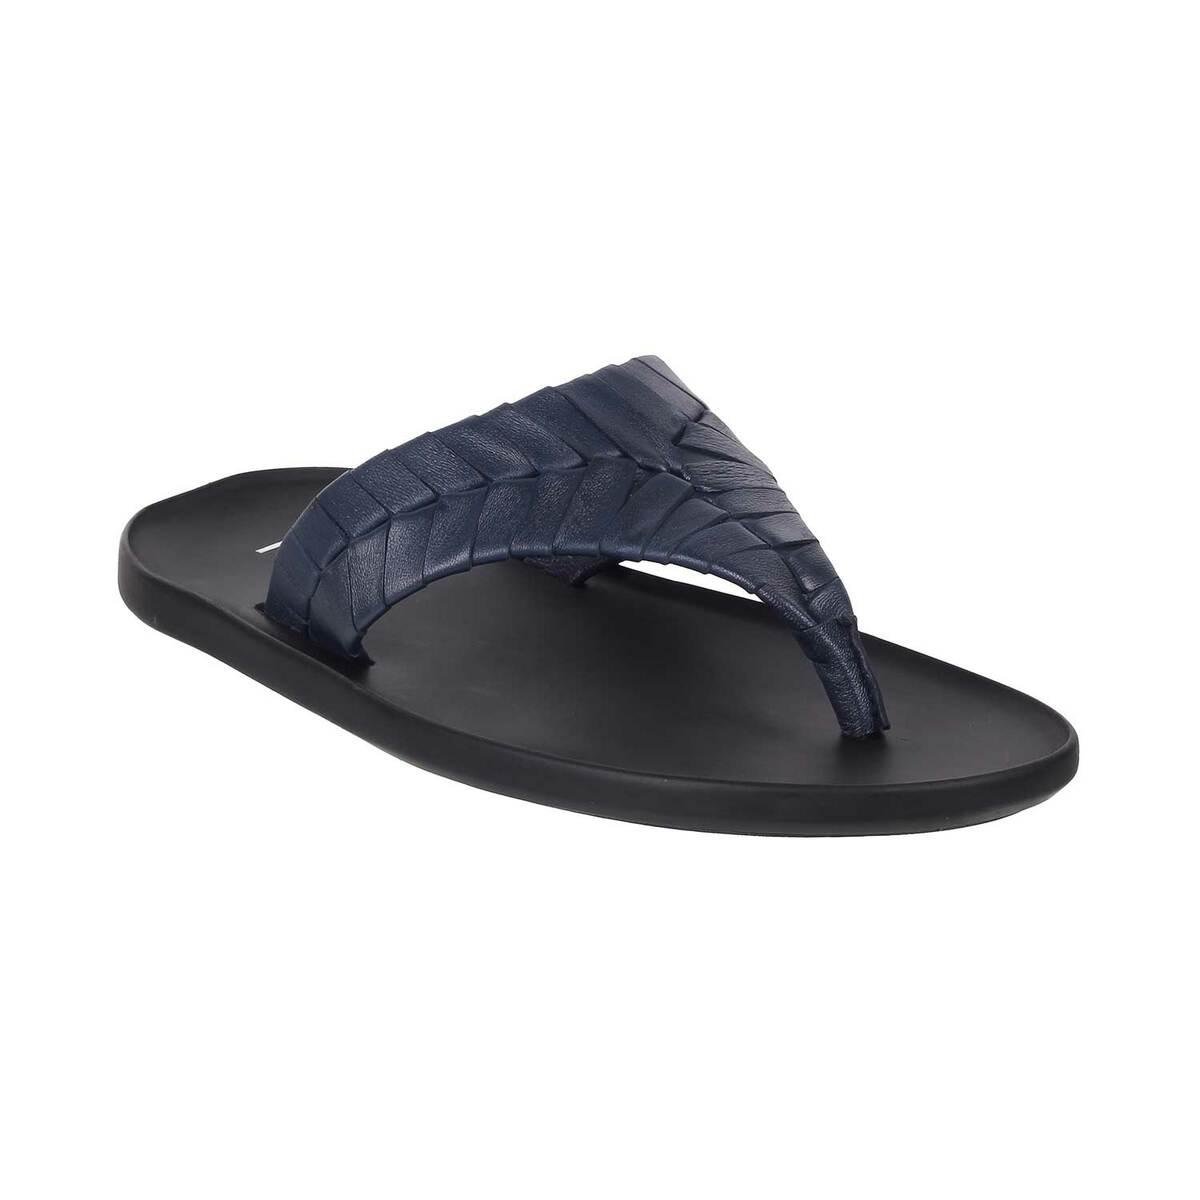 FEATHER LEATHER Men's Comfortable & Fashionable Sandals & Slippers | Casual  Slipper/Flip-Flop for Men